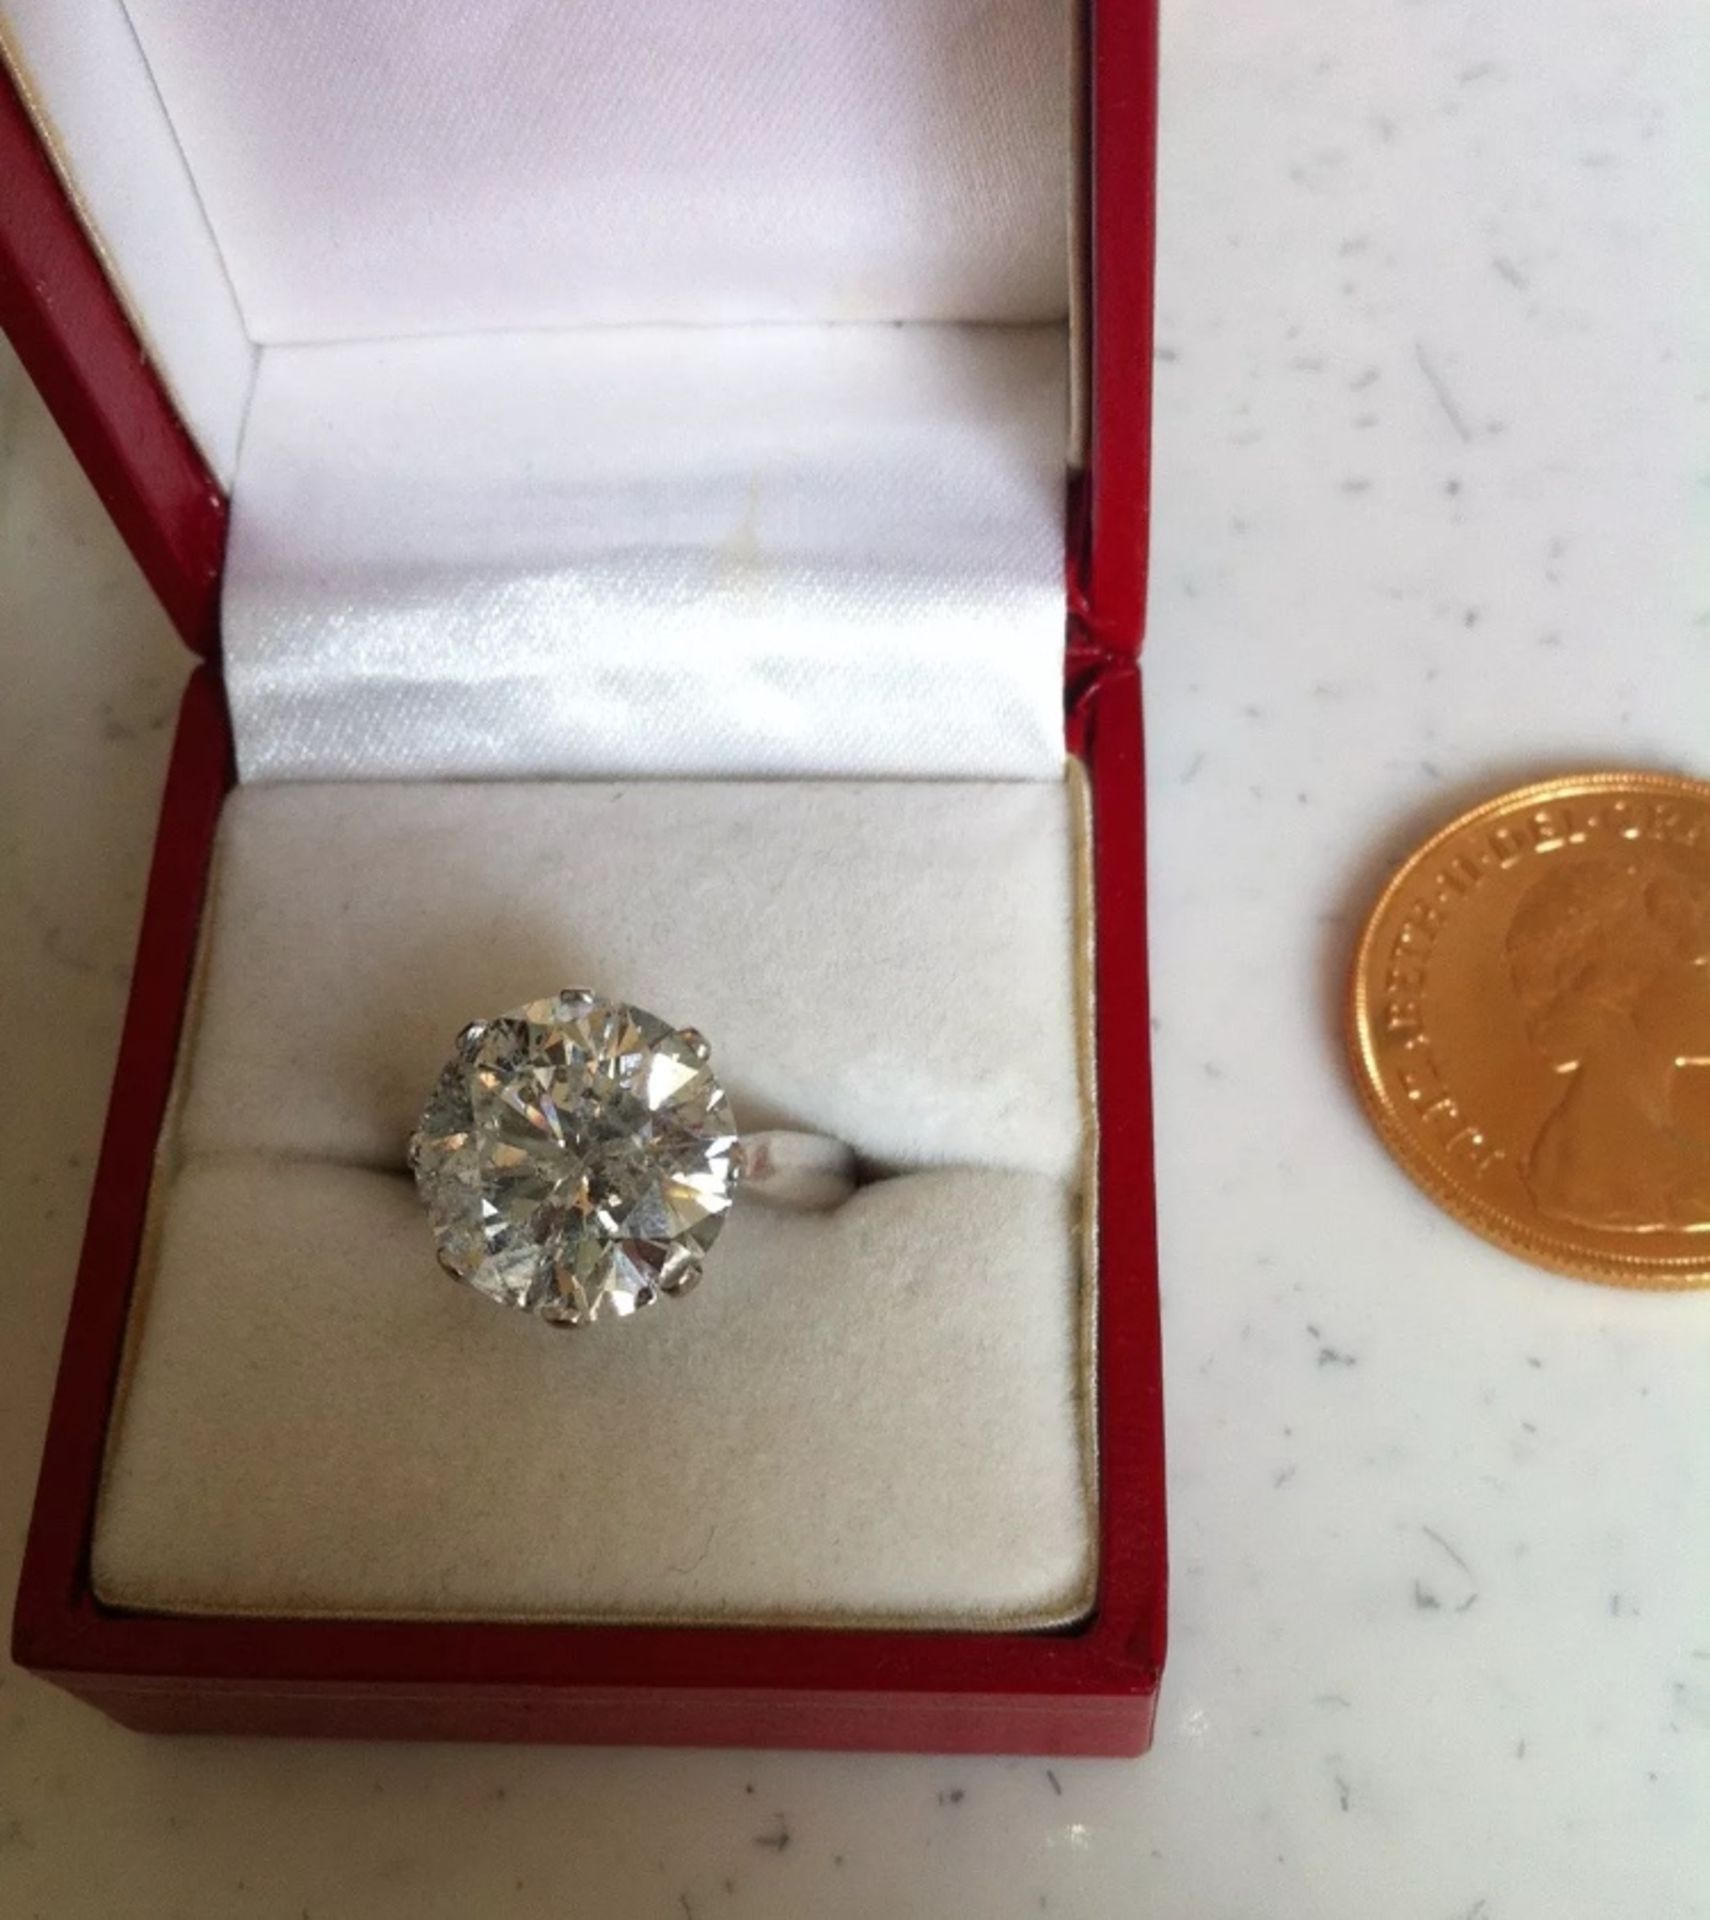 8.01 Carat Solitaire Diamond Engagement Ring, Including Gemology Certificate - Image 9 of 11